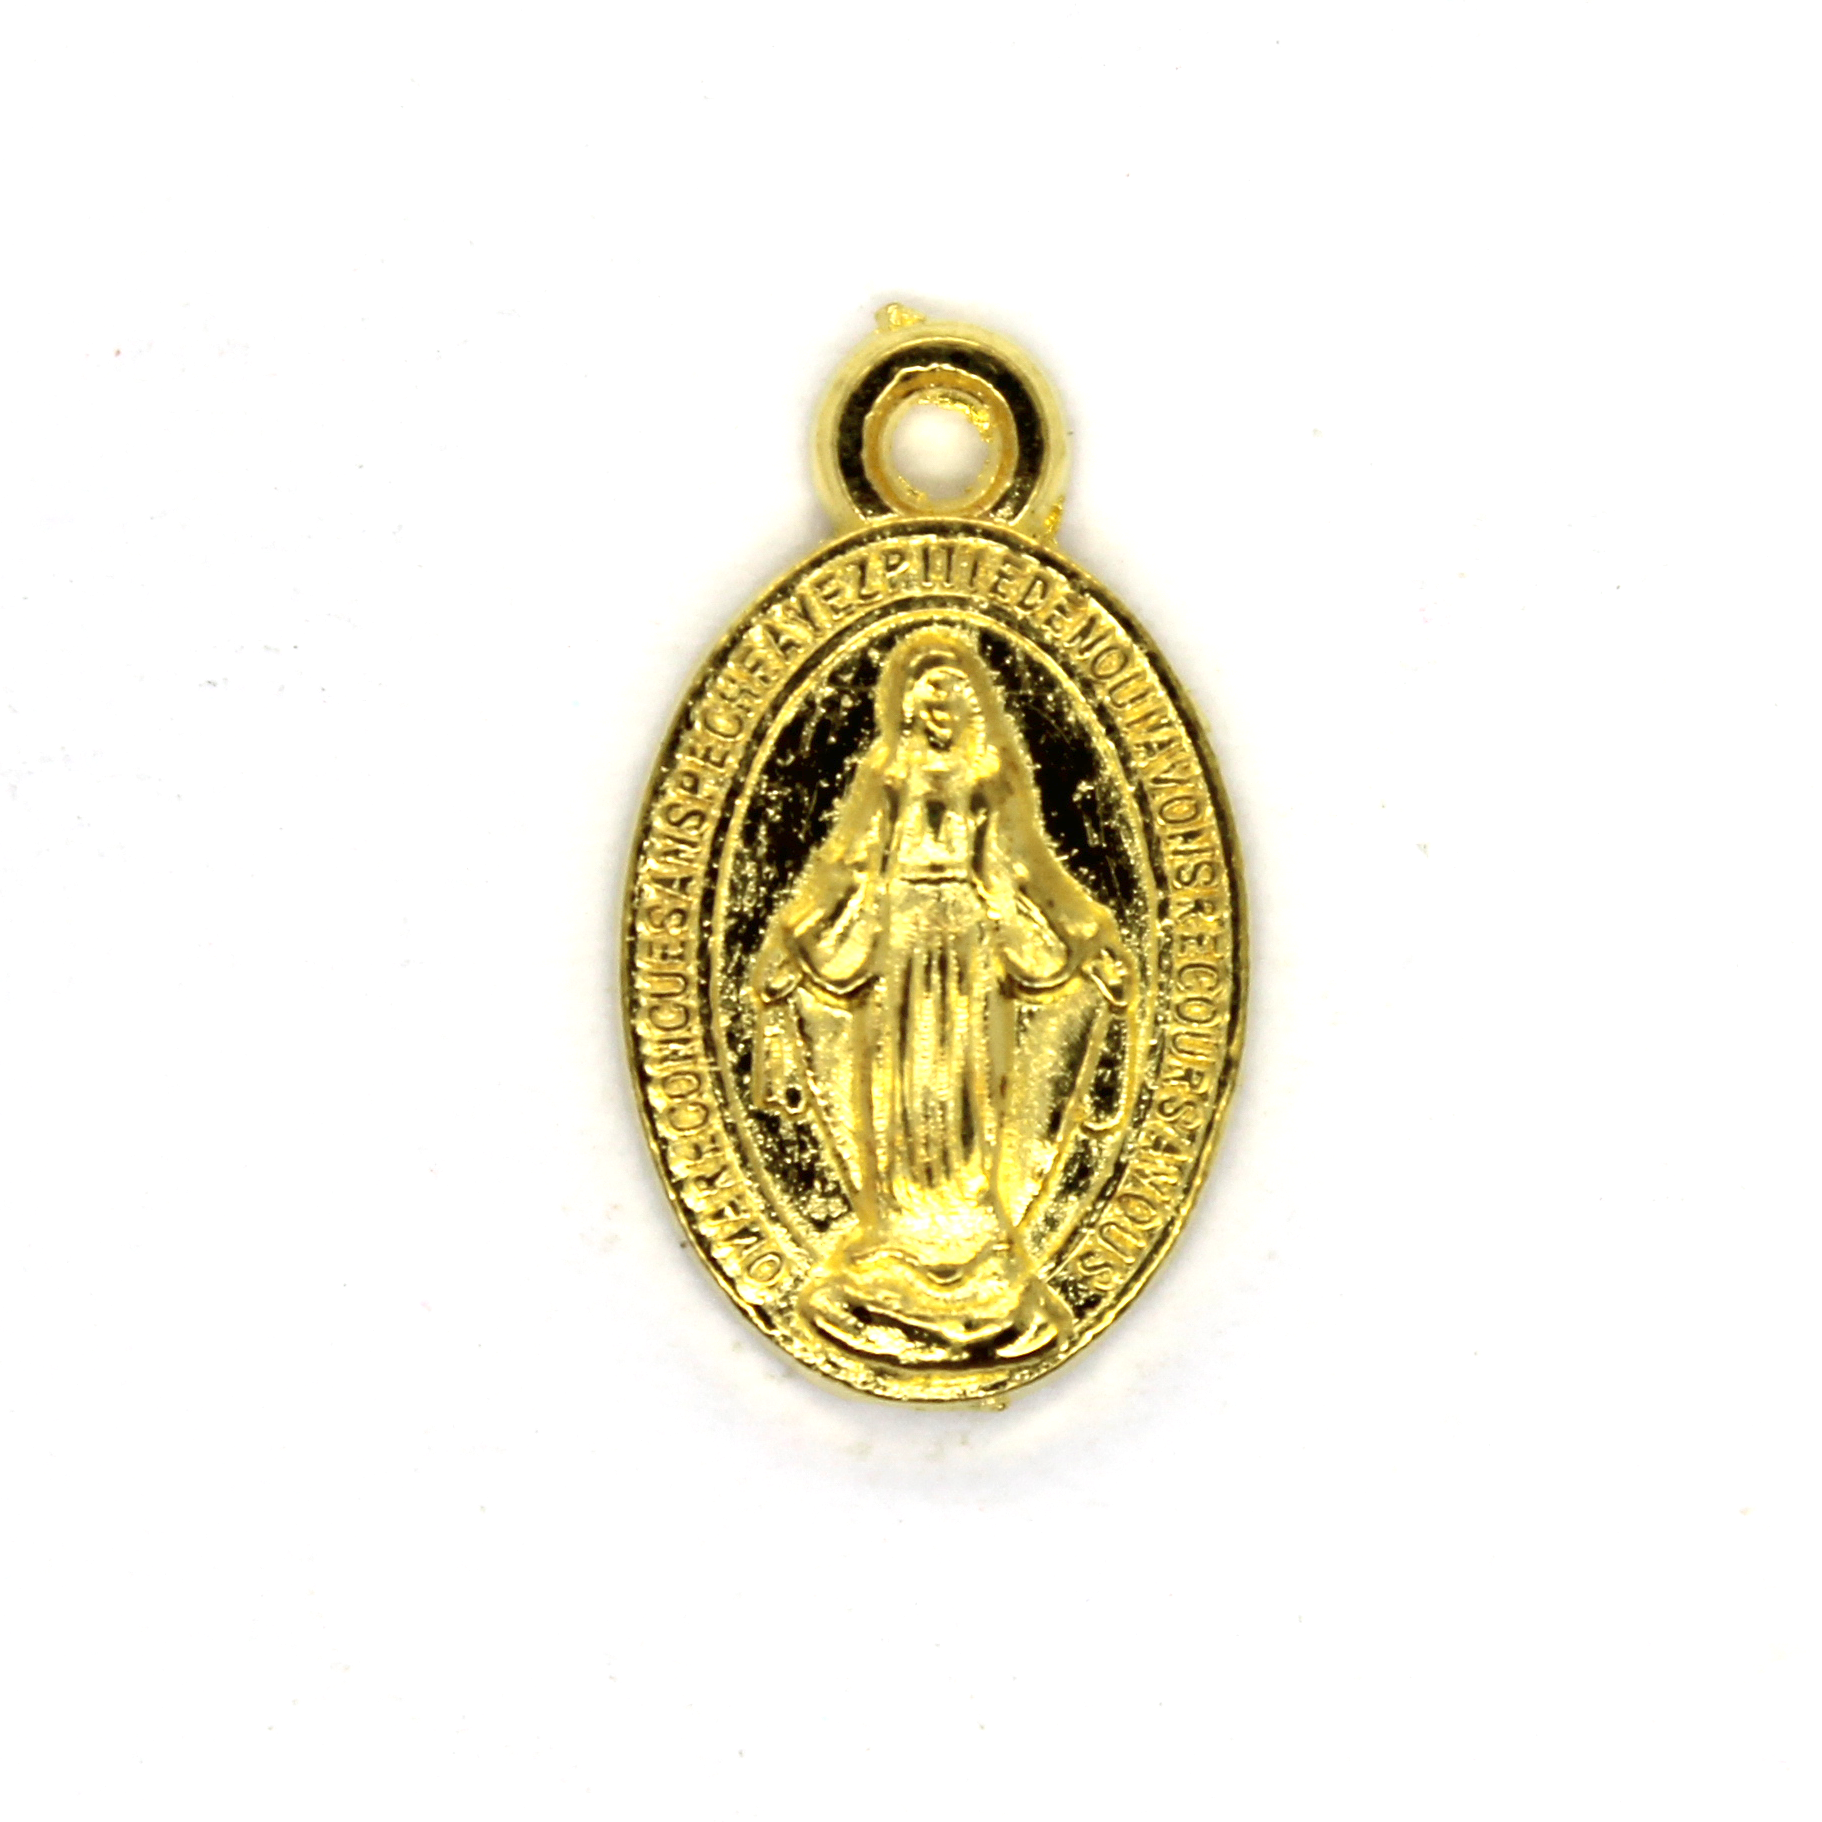 Charms, Engraved Mary, Gold, Alloy, 14.5mm x 8.5mm x 2mm, Sold Per pkg 15